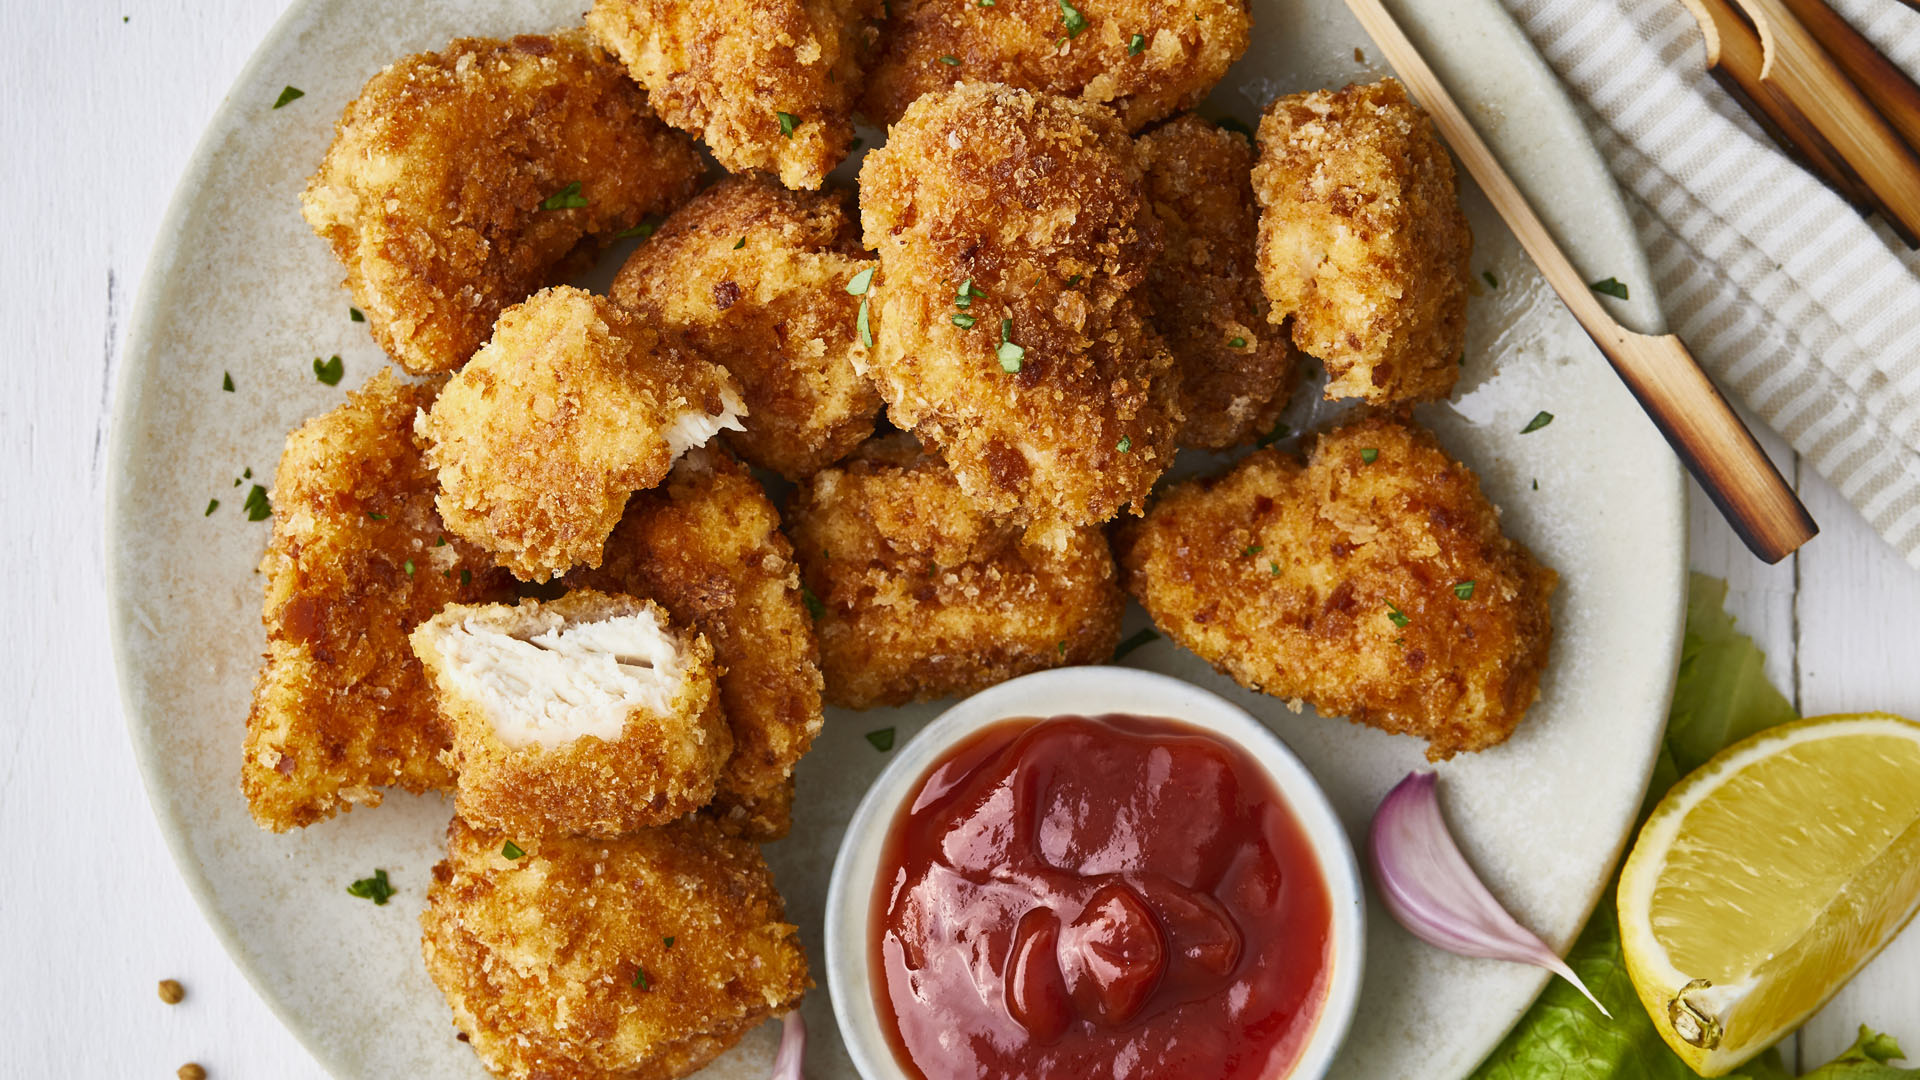 Make gluten-free chicken nuggets from scratch for the kids